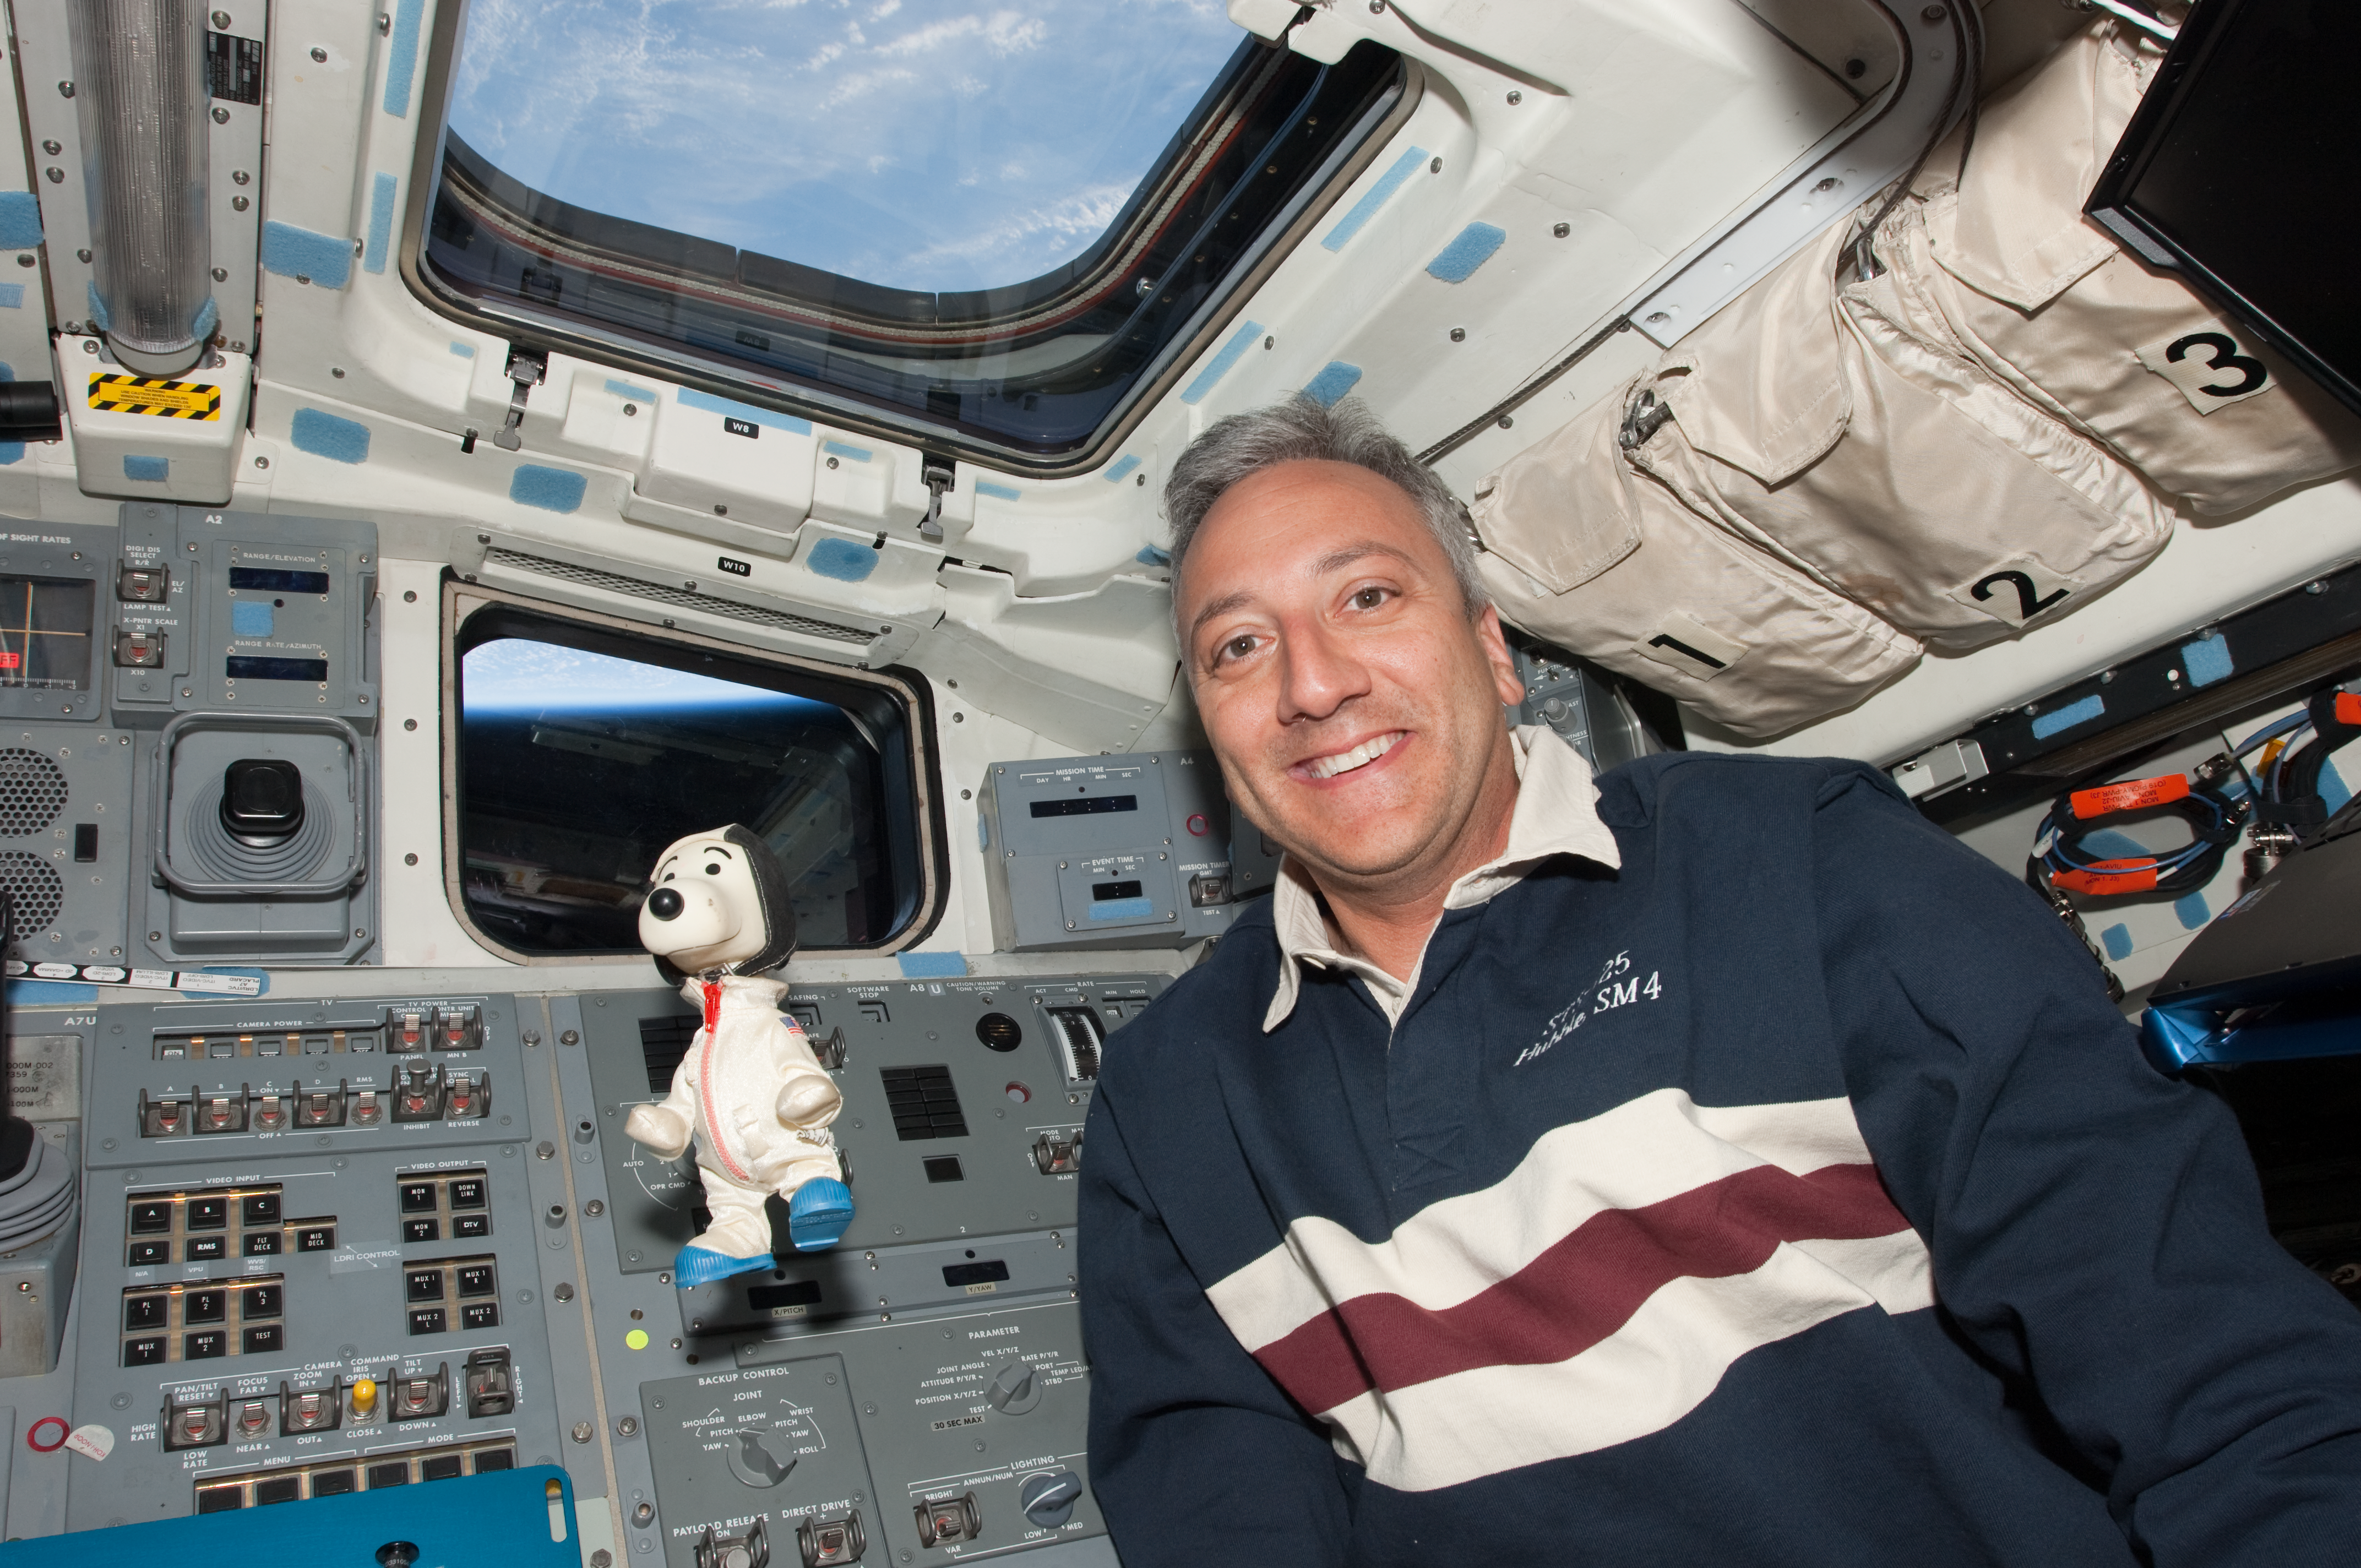 Massimino with his co-pilot, Snoopy.